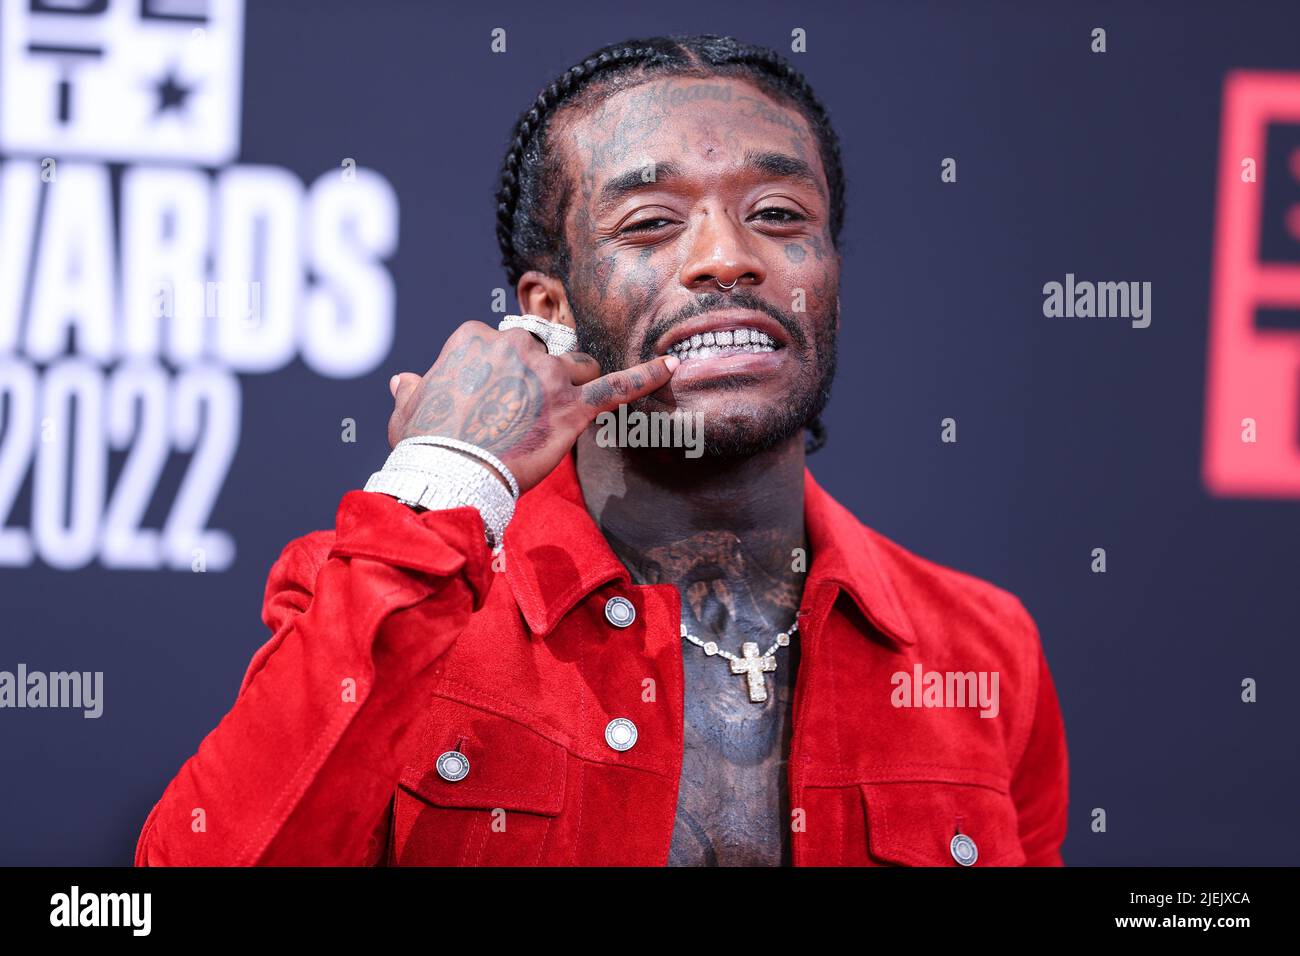 LOS ANGELES, CALIFORNIA, USA - JUNE 26: Lil Uzi Vert arrives at the BET Awards 2022 held at Microsoft Theater at L.A. Live on June 26, 2022 in Los Angeles, California, United States. (Photo by Xavier Collin/Image Press Agency) Credit: Image Press Agency/Alamy Live News Stock Photo